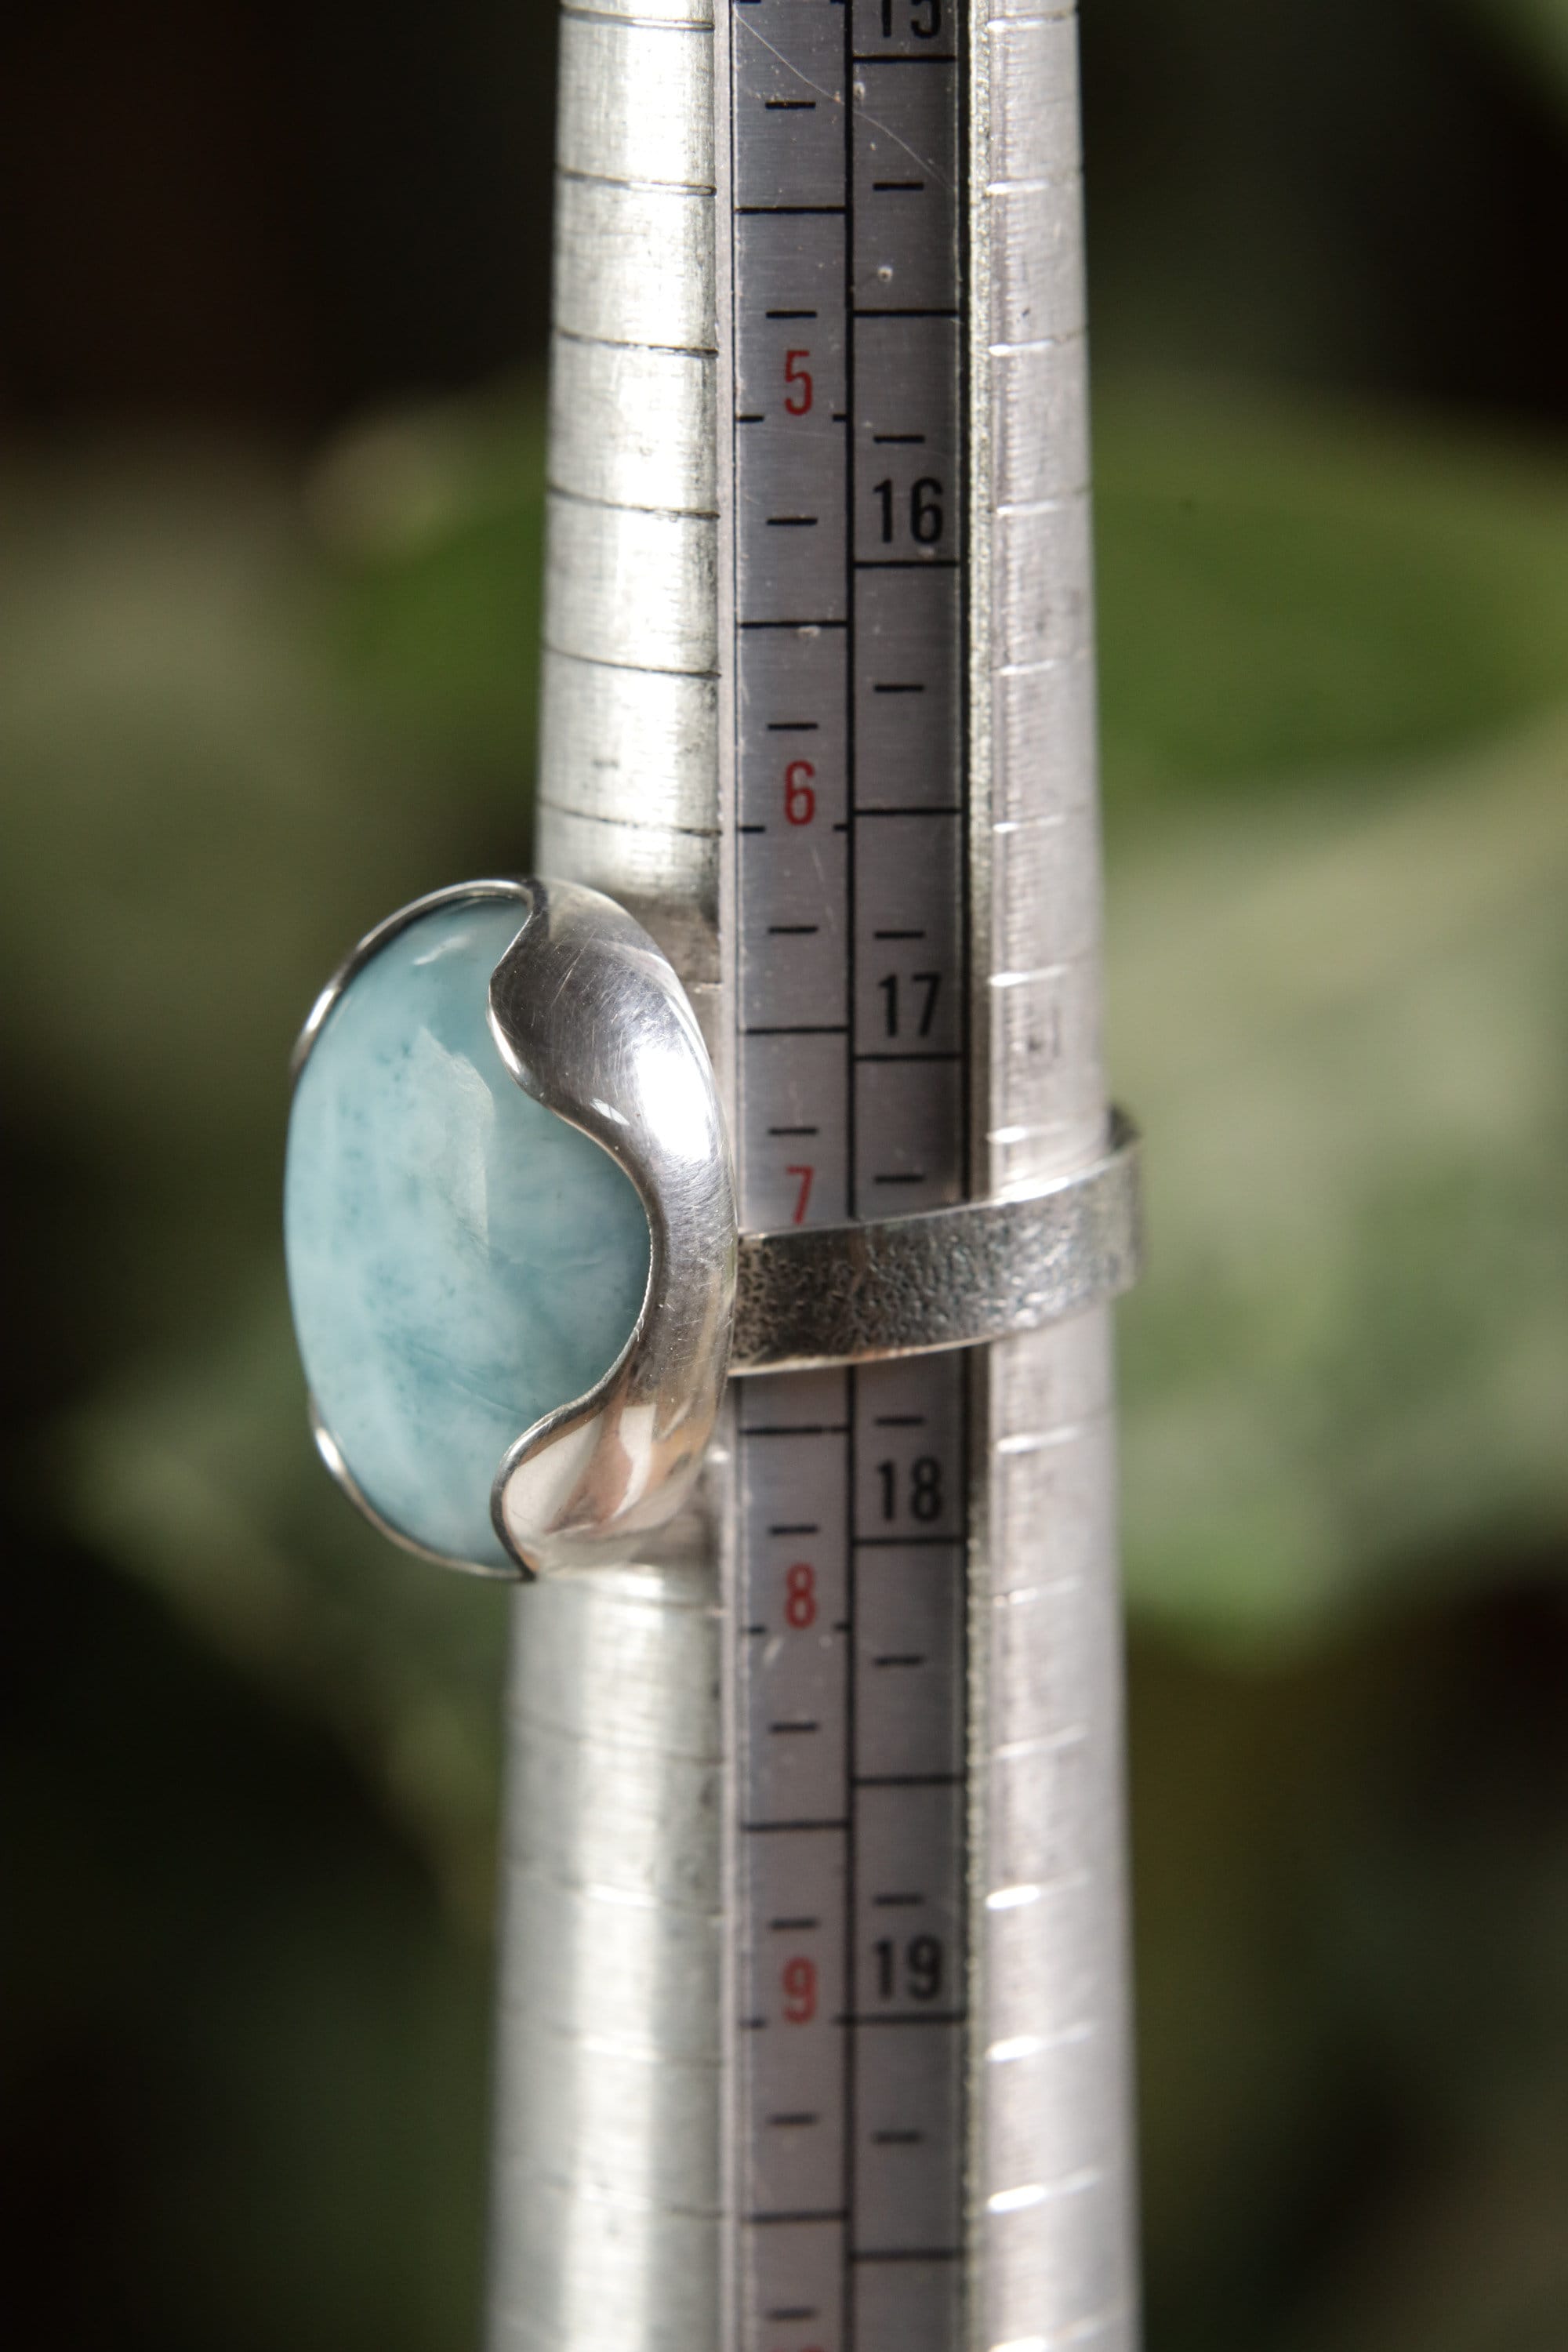 A Tribute to Oceanic Splendor: Adjustable Sterling Silver Ring with Oval Larimar - Unisex - Size 5-12 US - NO/06